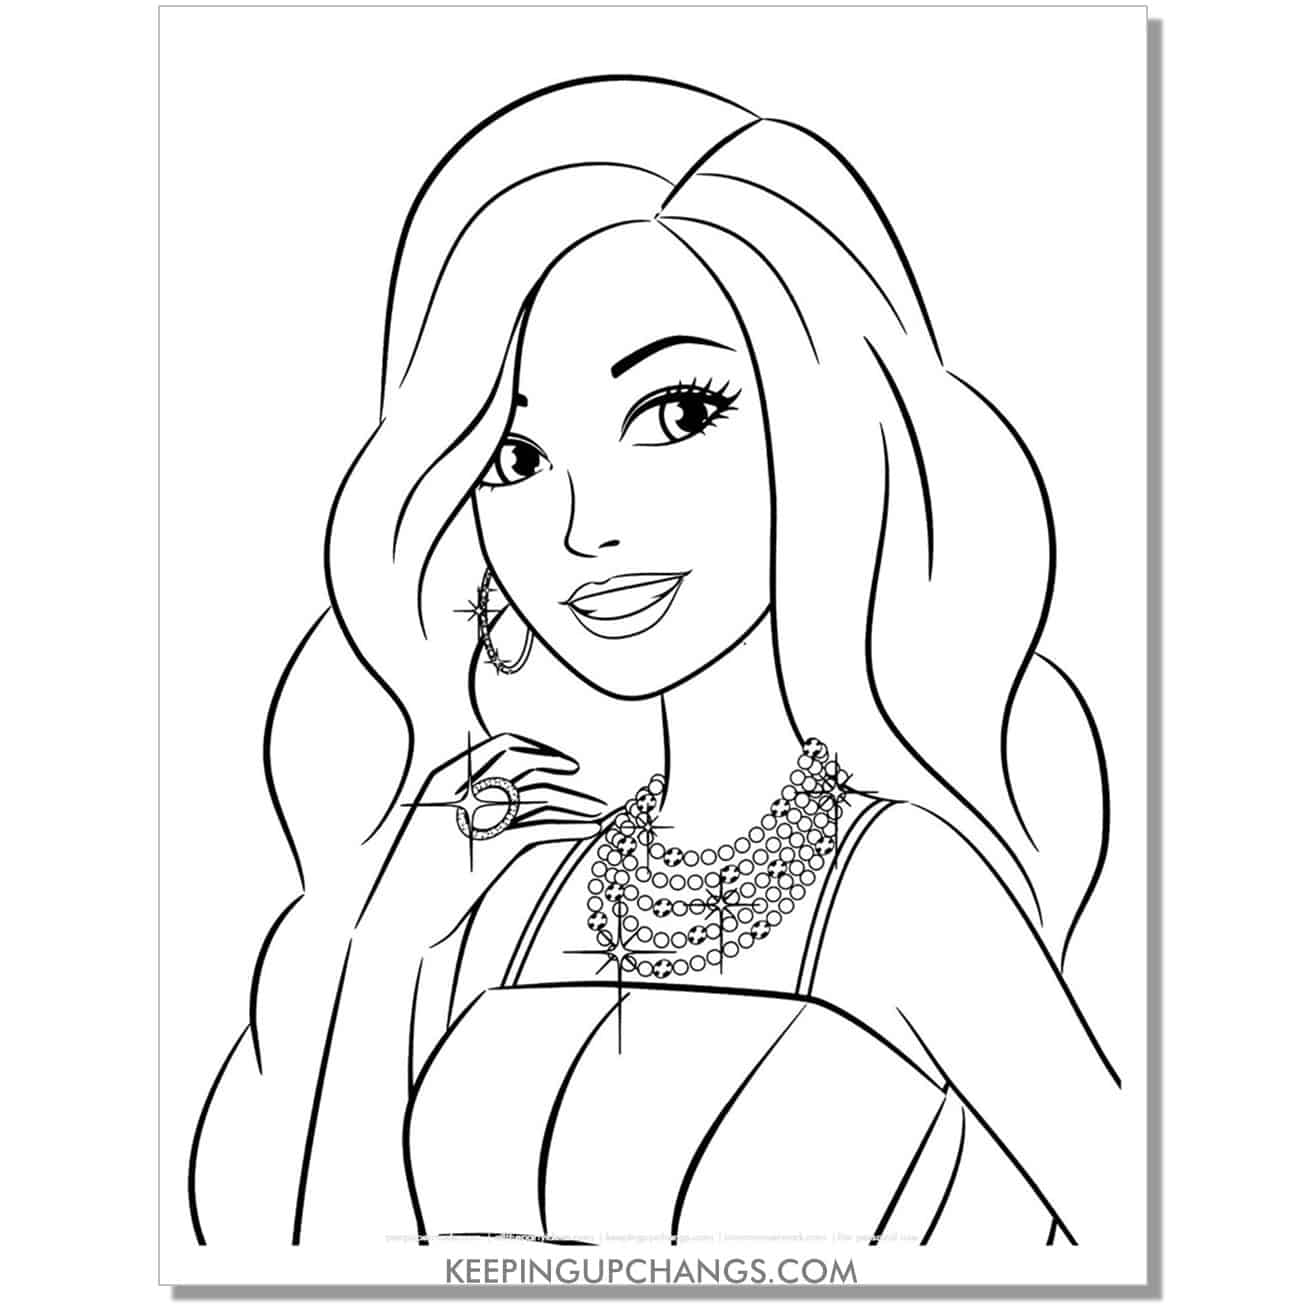 barbie with bling earrings, ring, necklace coloring page.